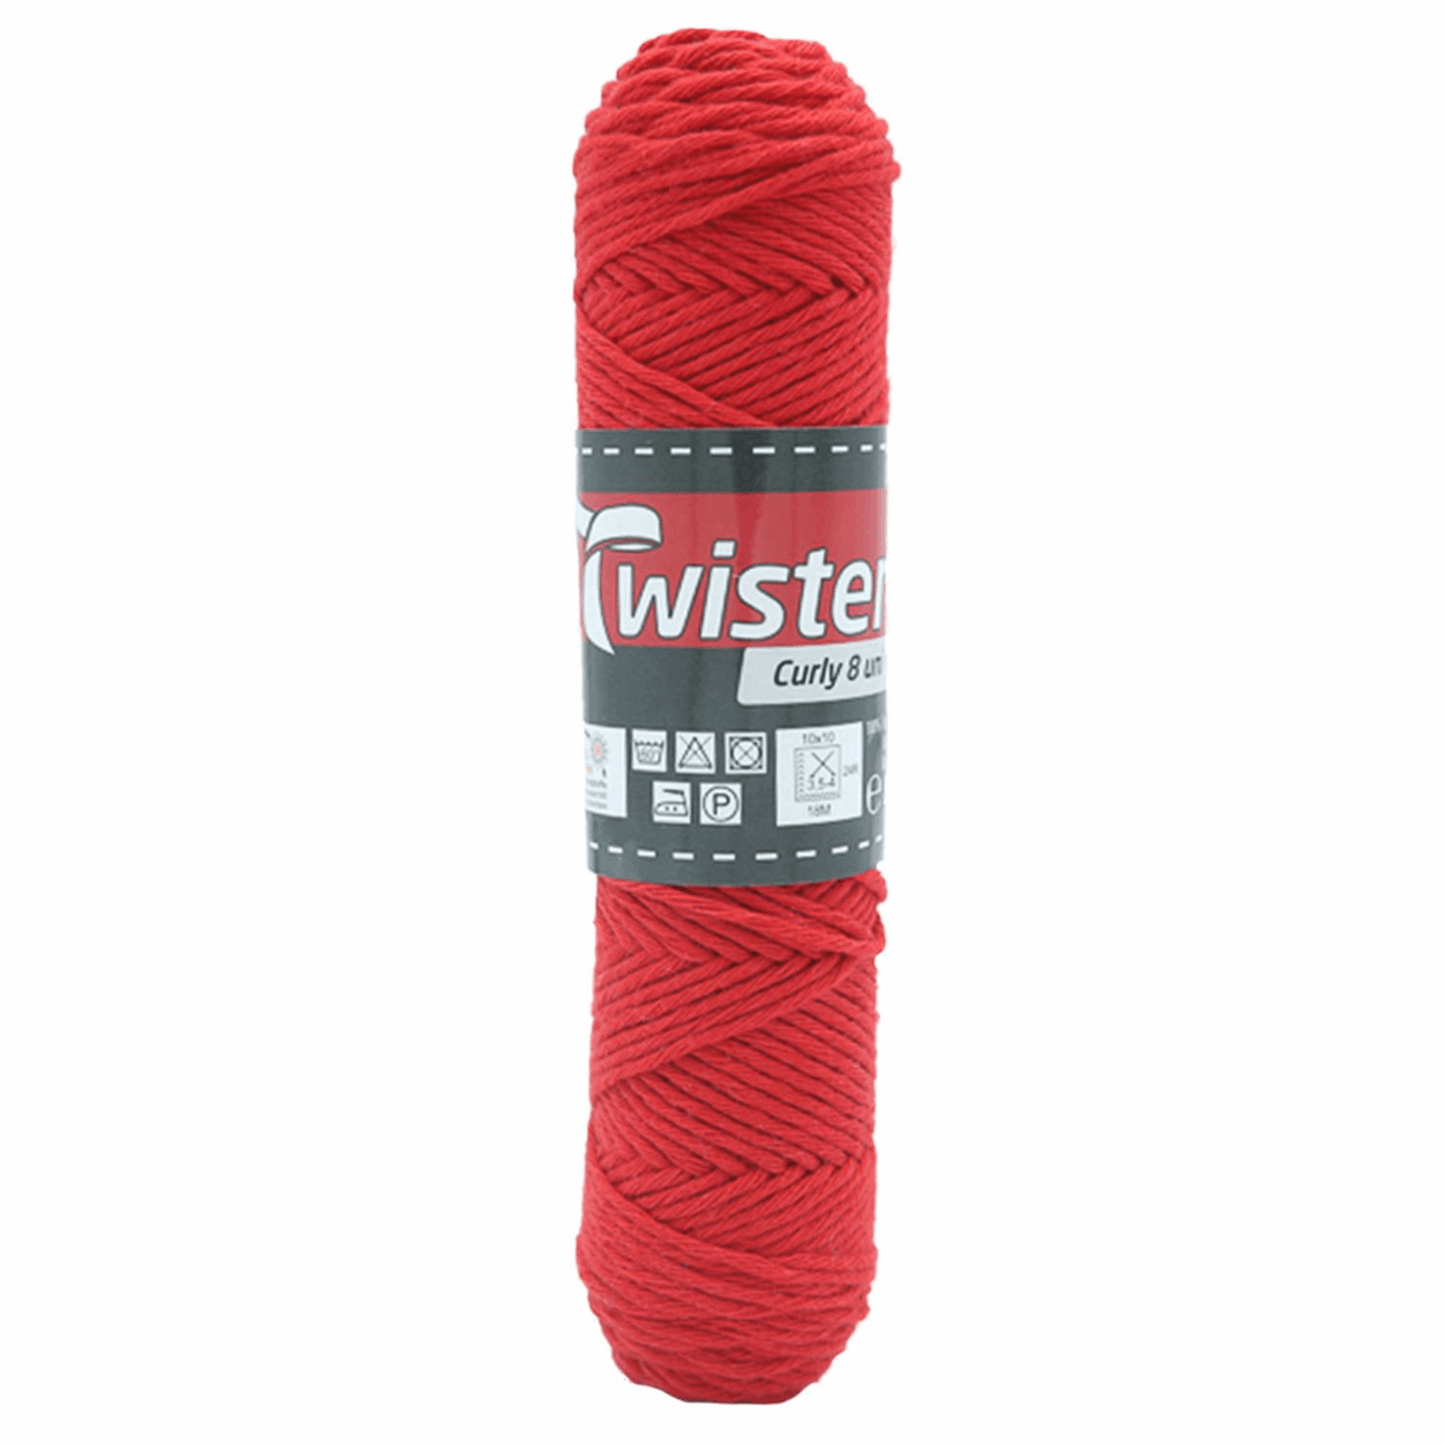 Twister Curly 8 50g, rot, 98302, Farbe 35